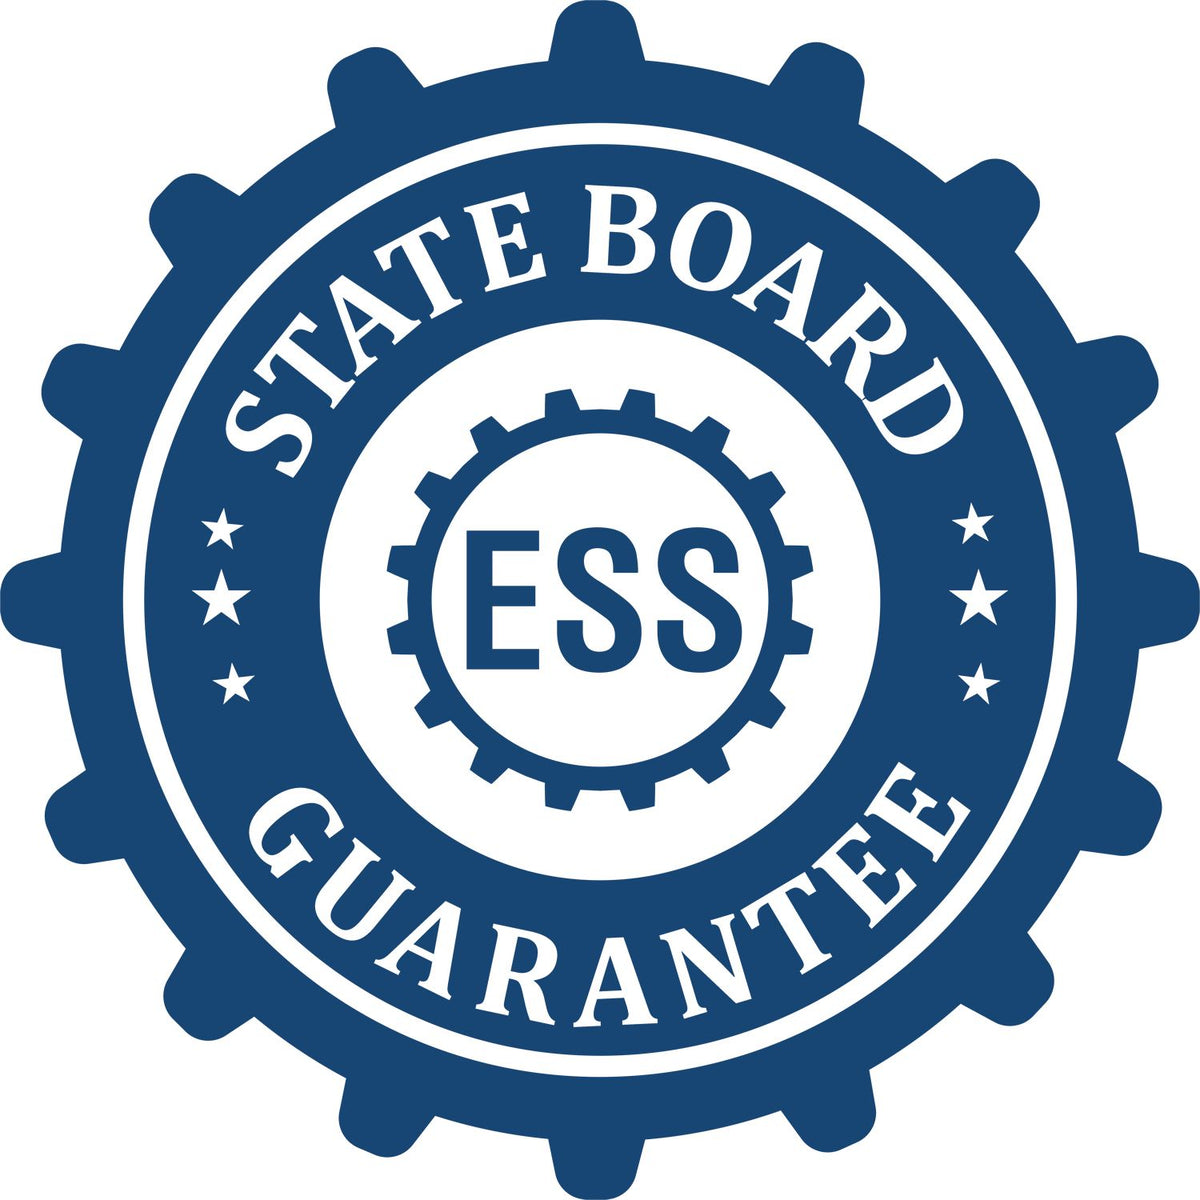 An emblem in a gear shape illustrating a state board guarantee for the State of Texas Long Reach Architectural Embossing Seal product.